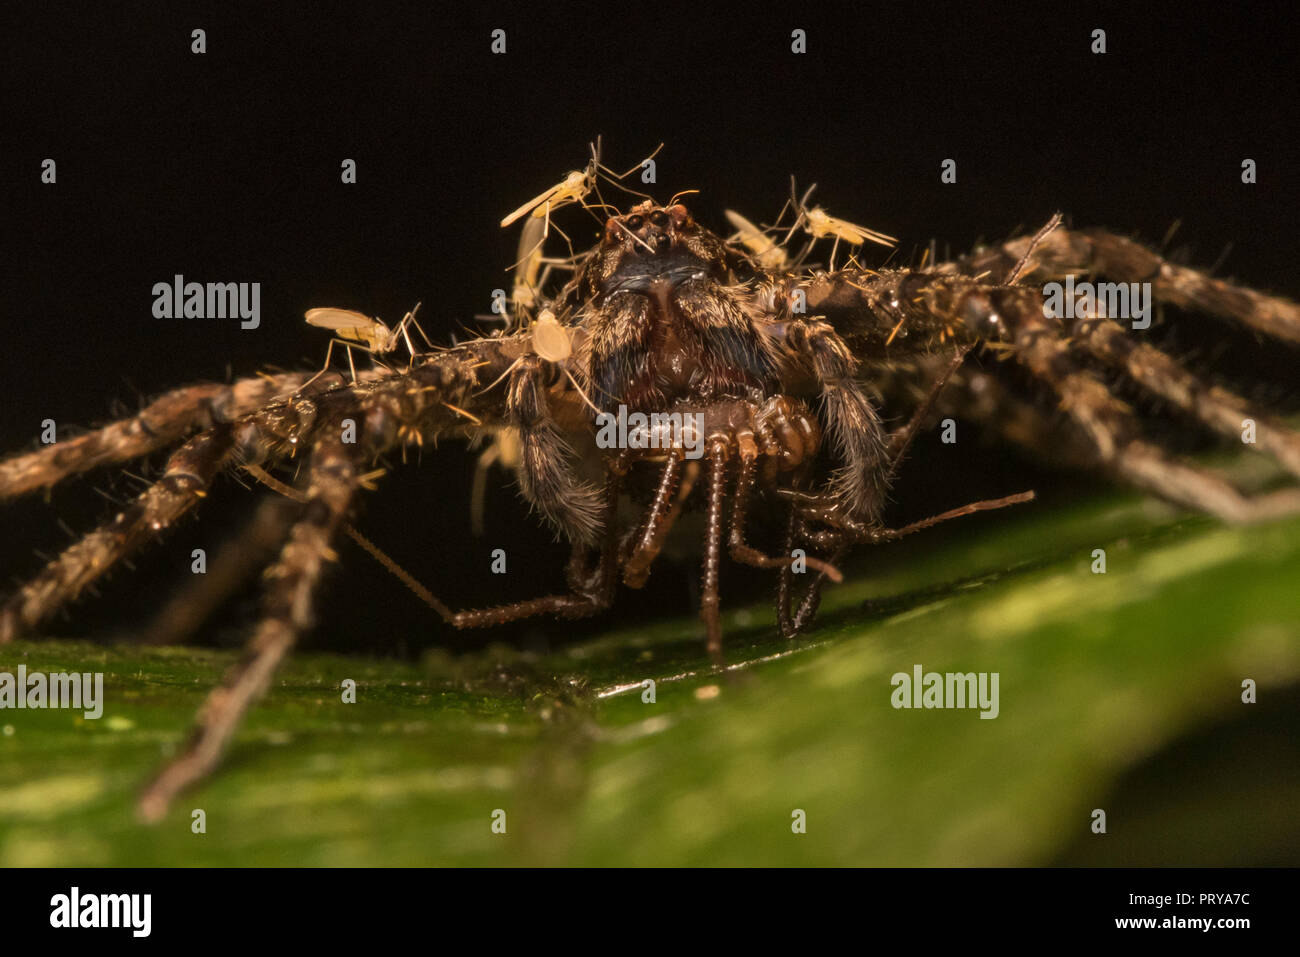 A large huntsman spider with prey, a swarm of gall midges (Cecidomyiidae) are sitting on him likely engaging in kleptoparasitism and stealing food. Stock Photo